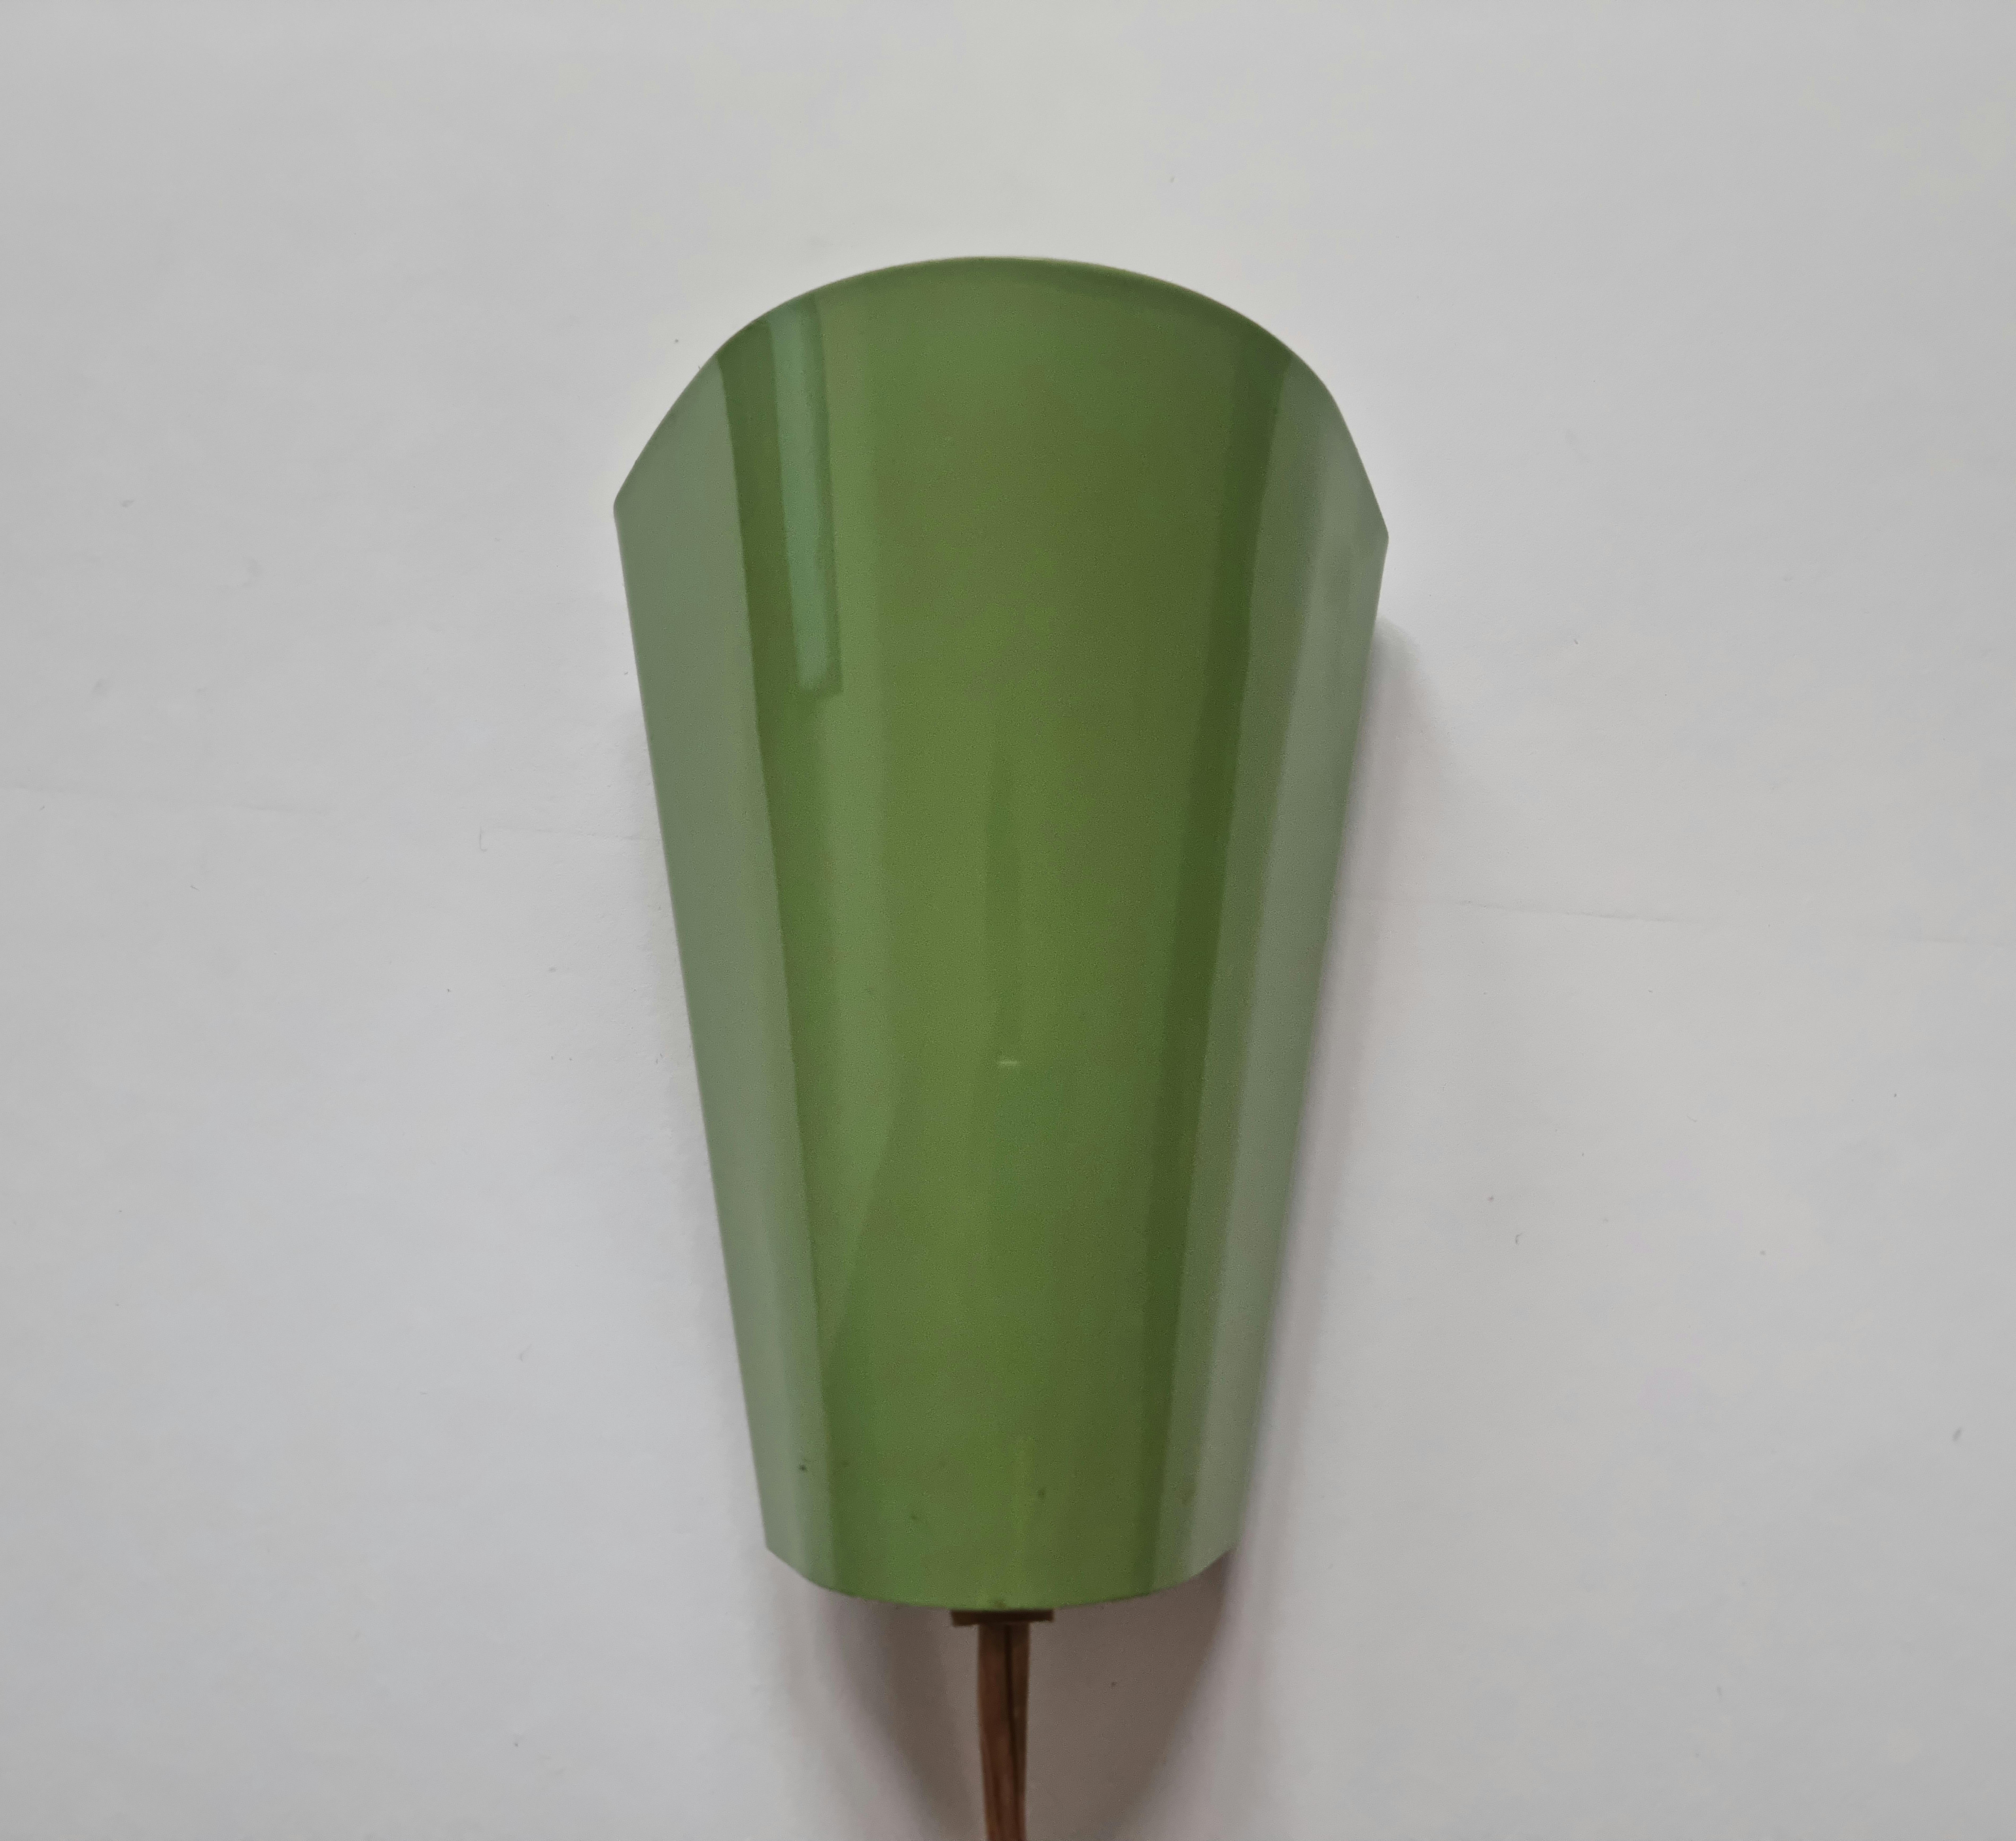 Midcentury Rare Wall Lamp Lidokov, Designed by Josef Hurka, 1960s For Sale 7